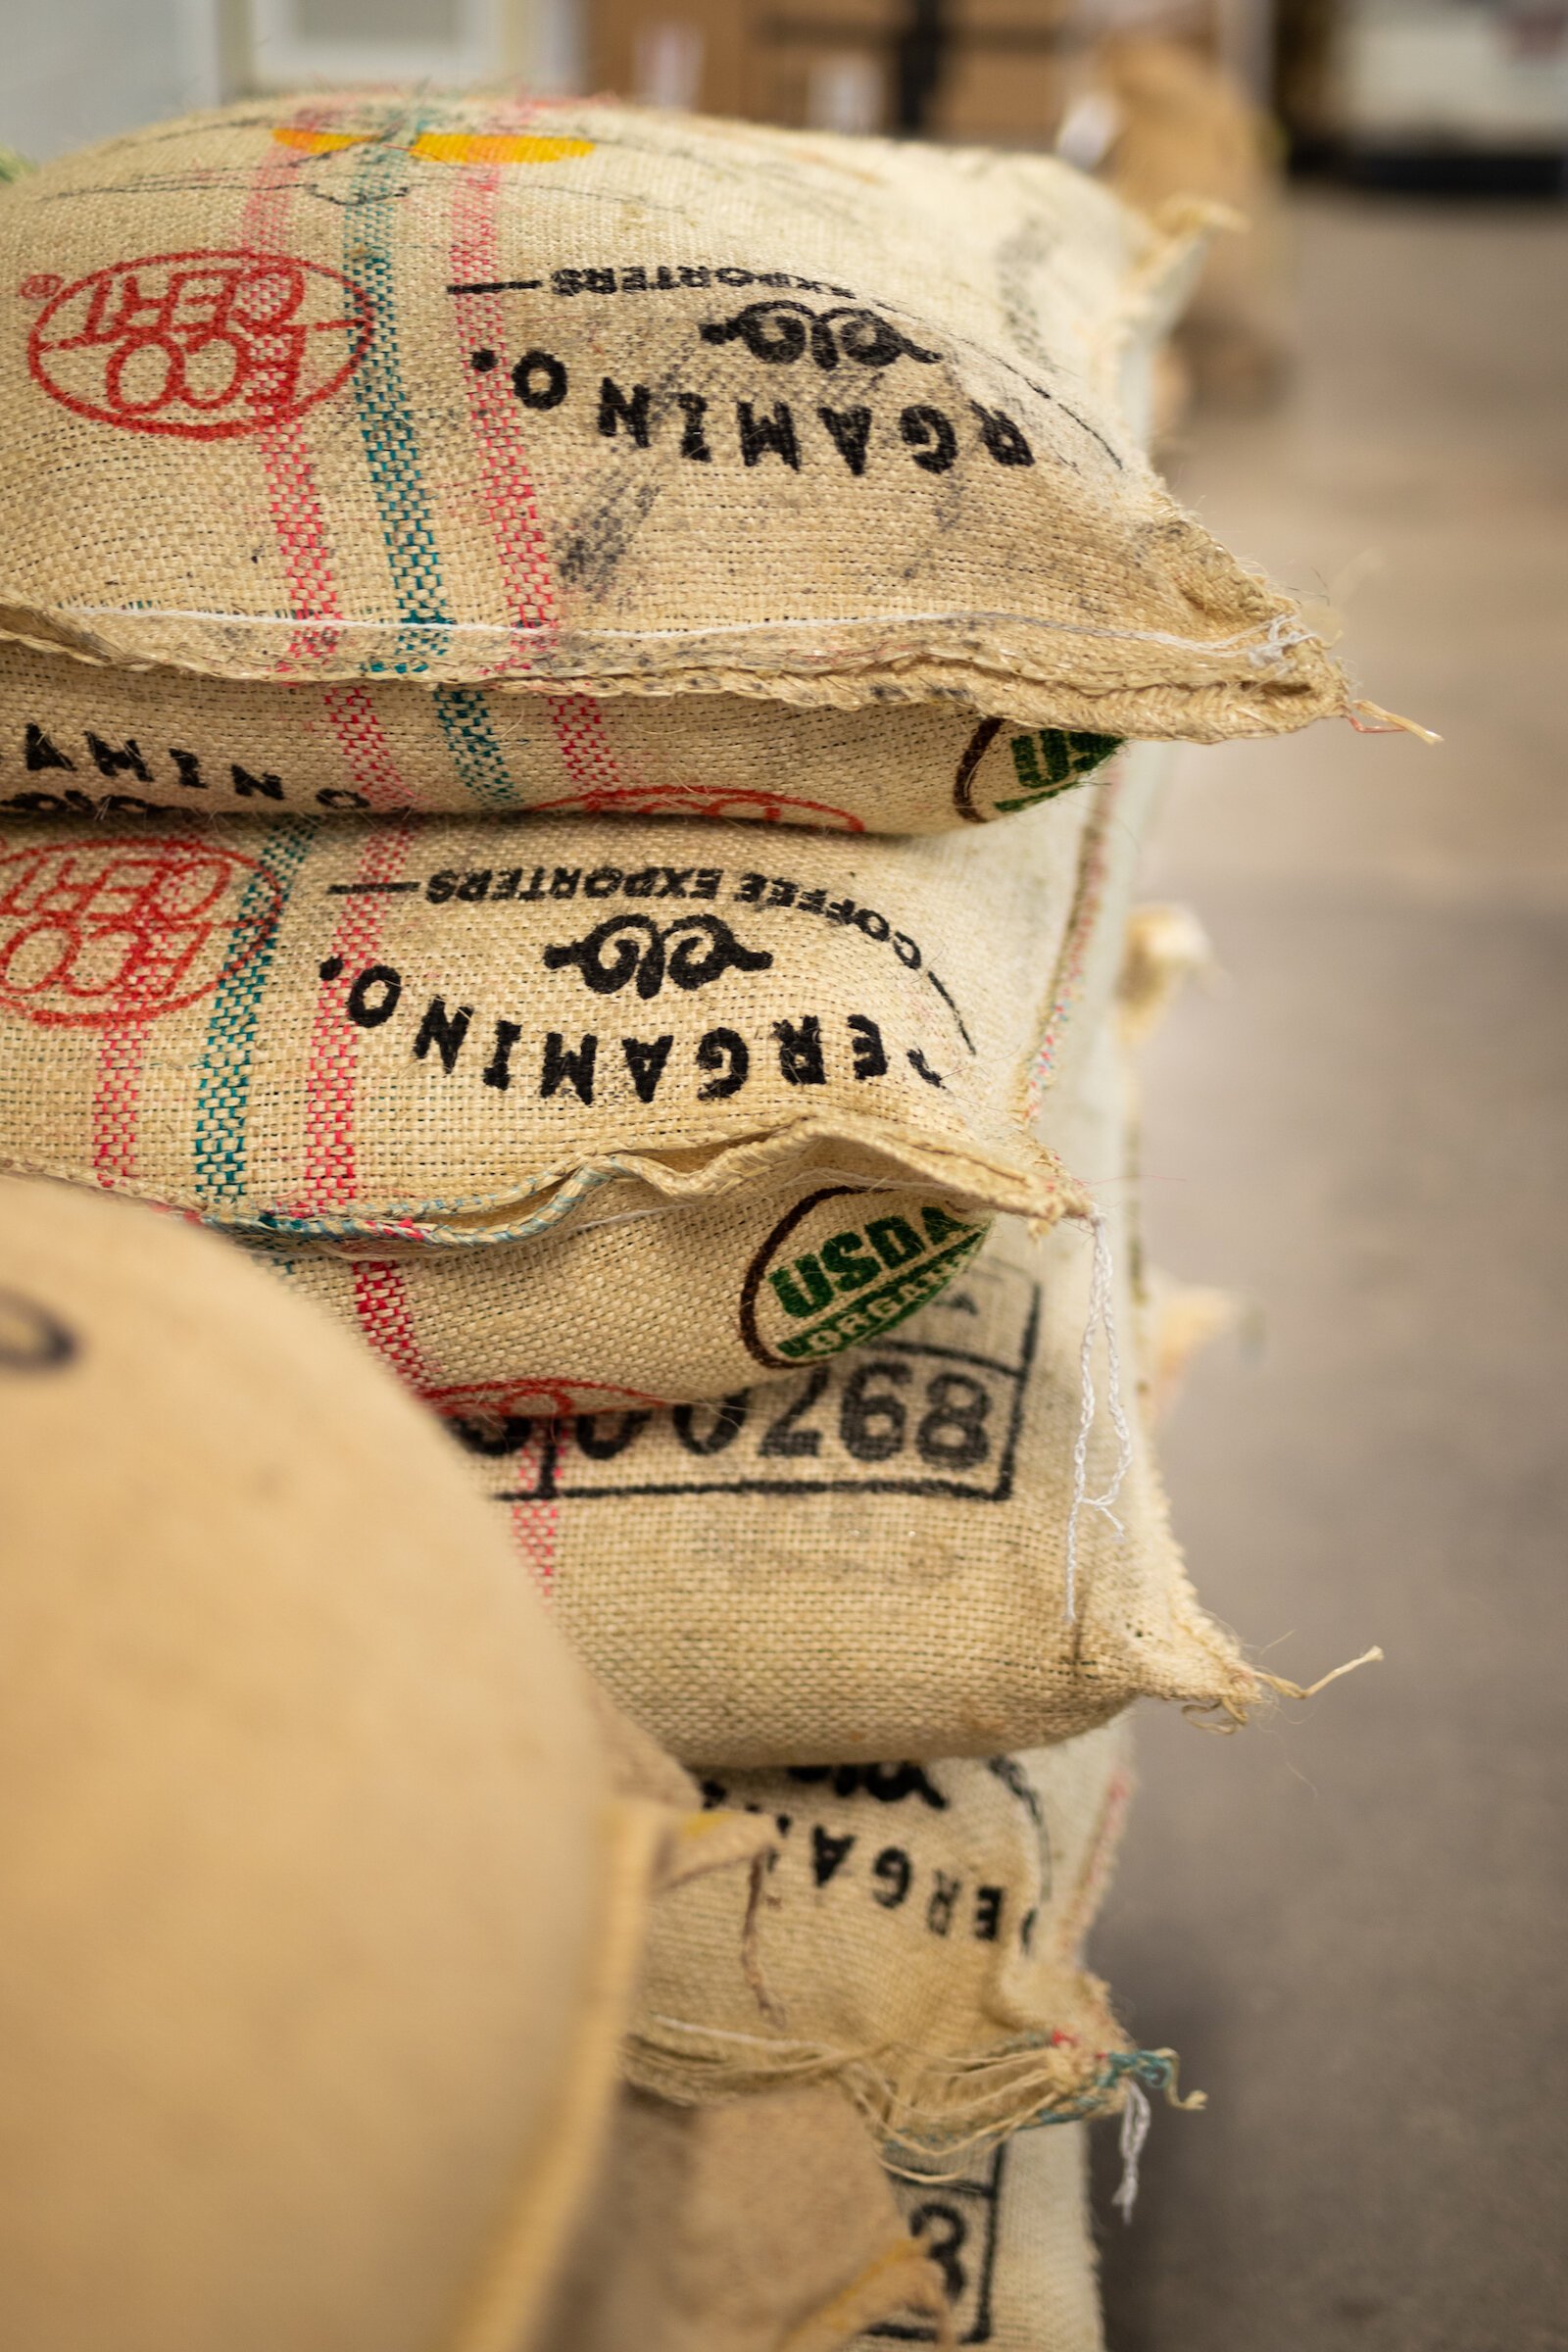 Utopian purchases coffee from farmers around the world.